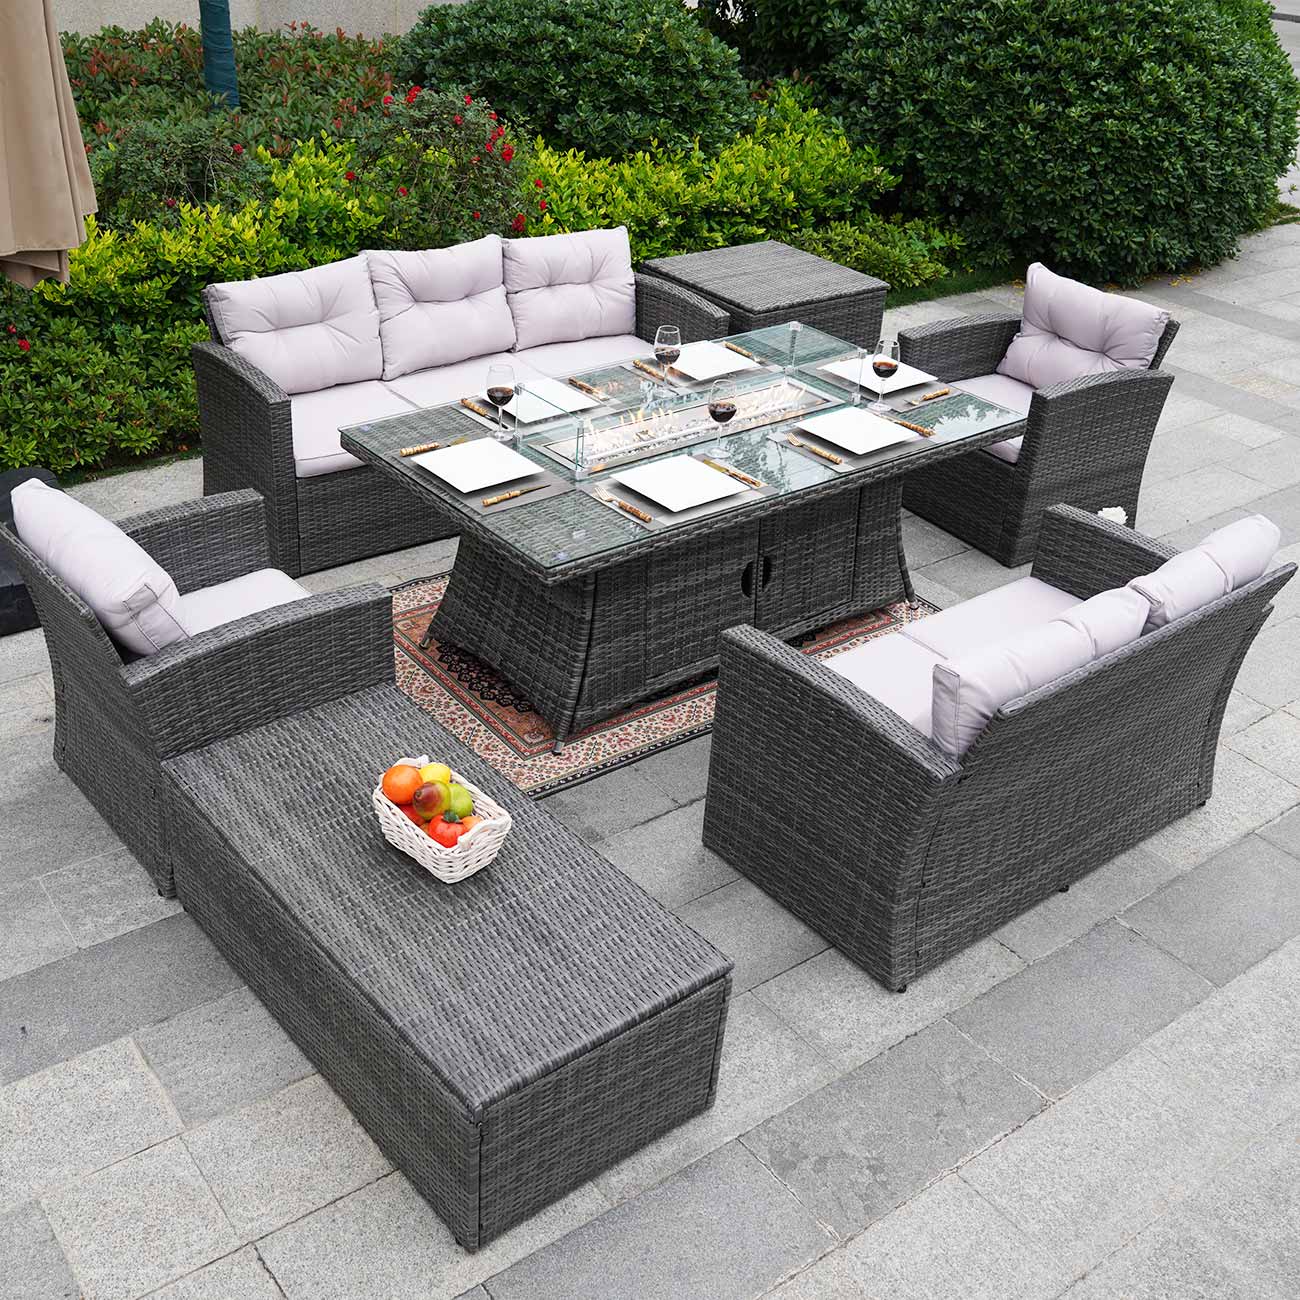 Abrihome Patio Furniture Sofa Set with Rectangular Fire Pit Glass Tabletop